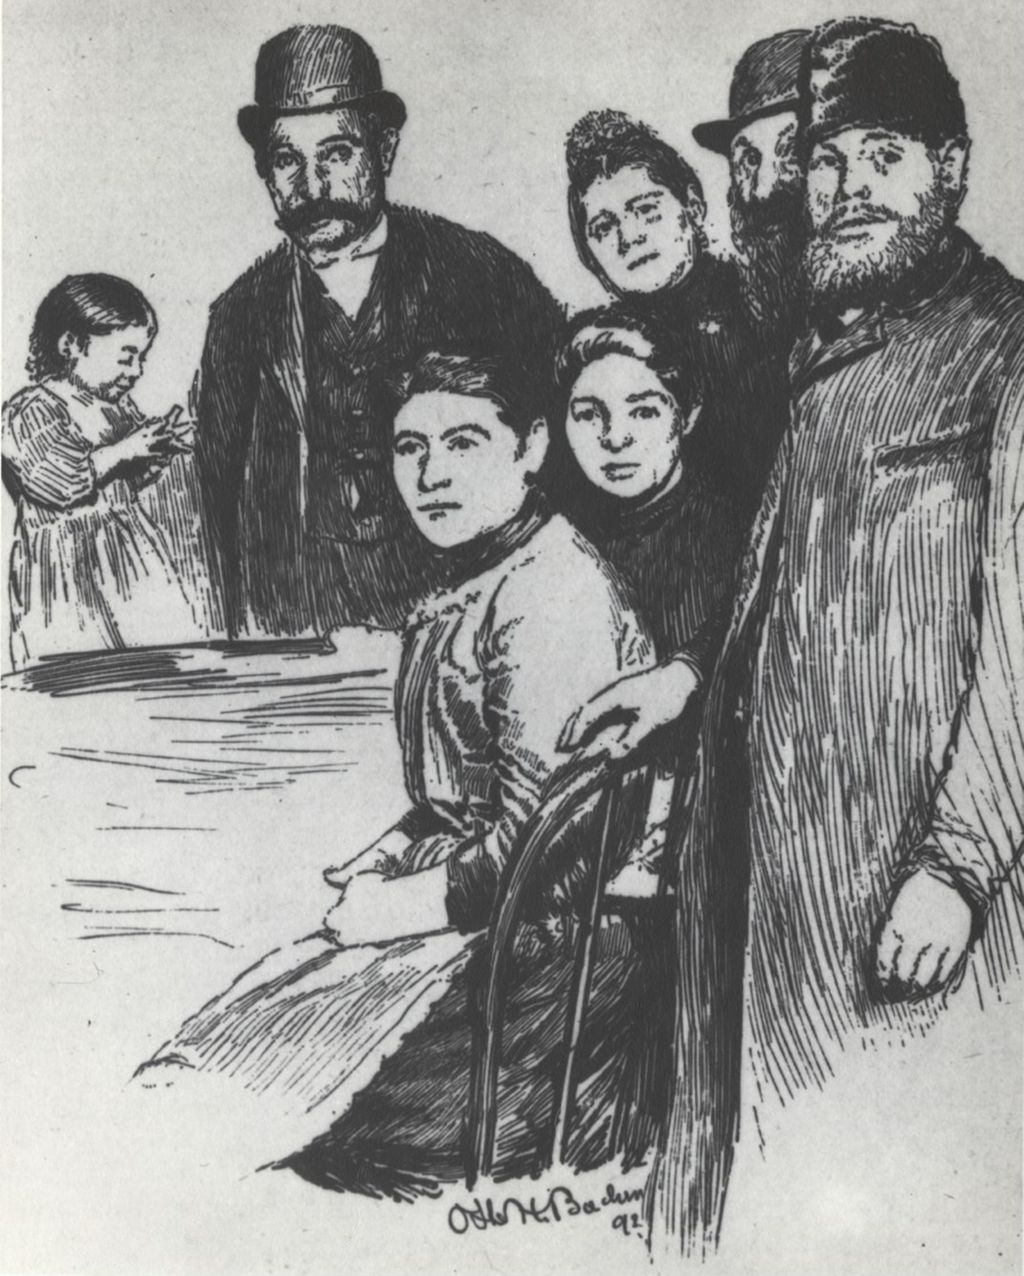 Drawing of "Immigrant Family" by Otto H. Bacher